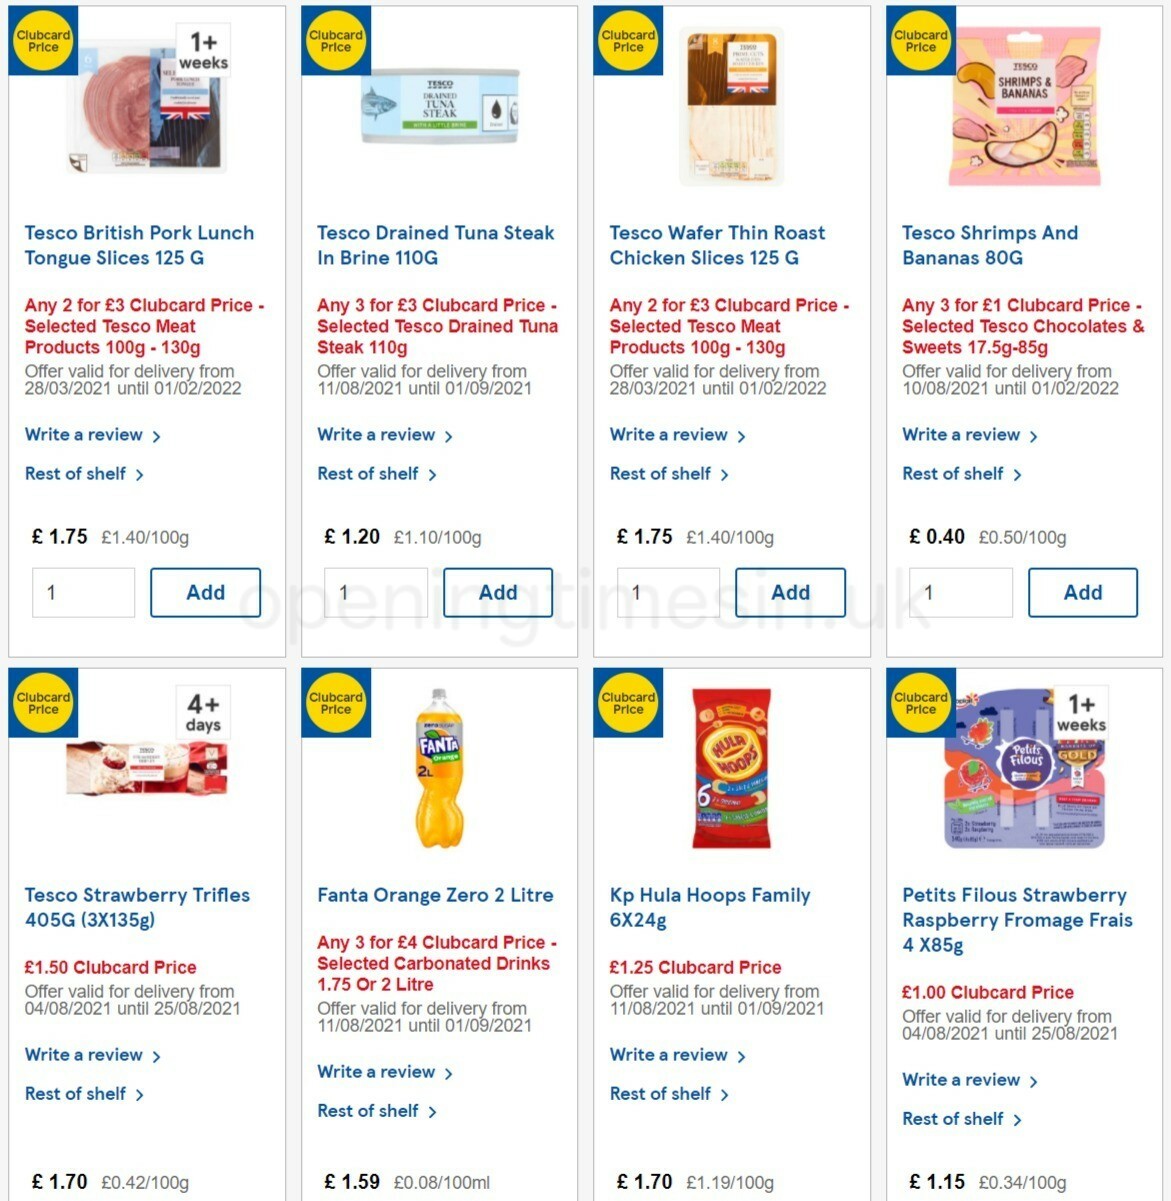 TESCO Offers from 18 August